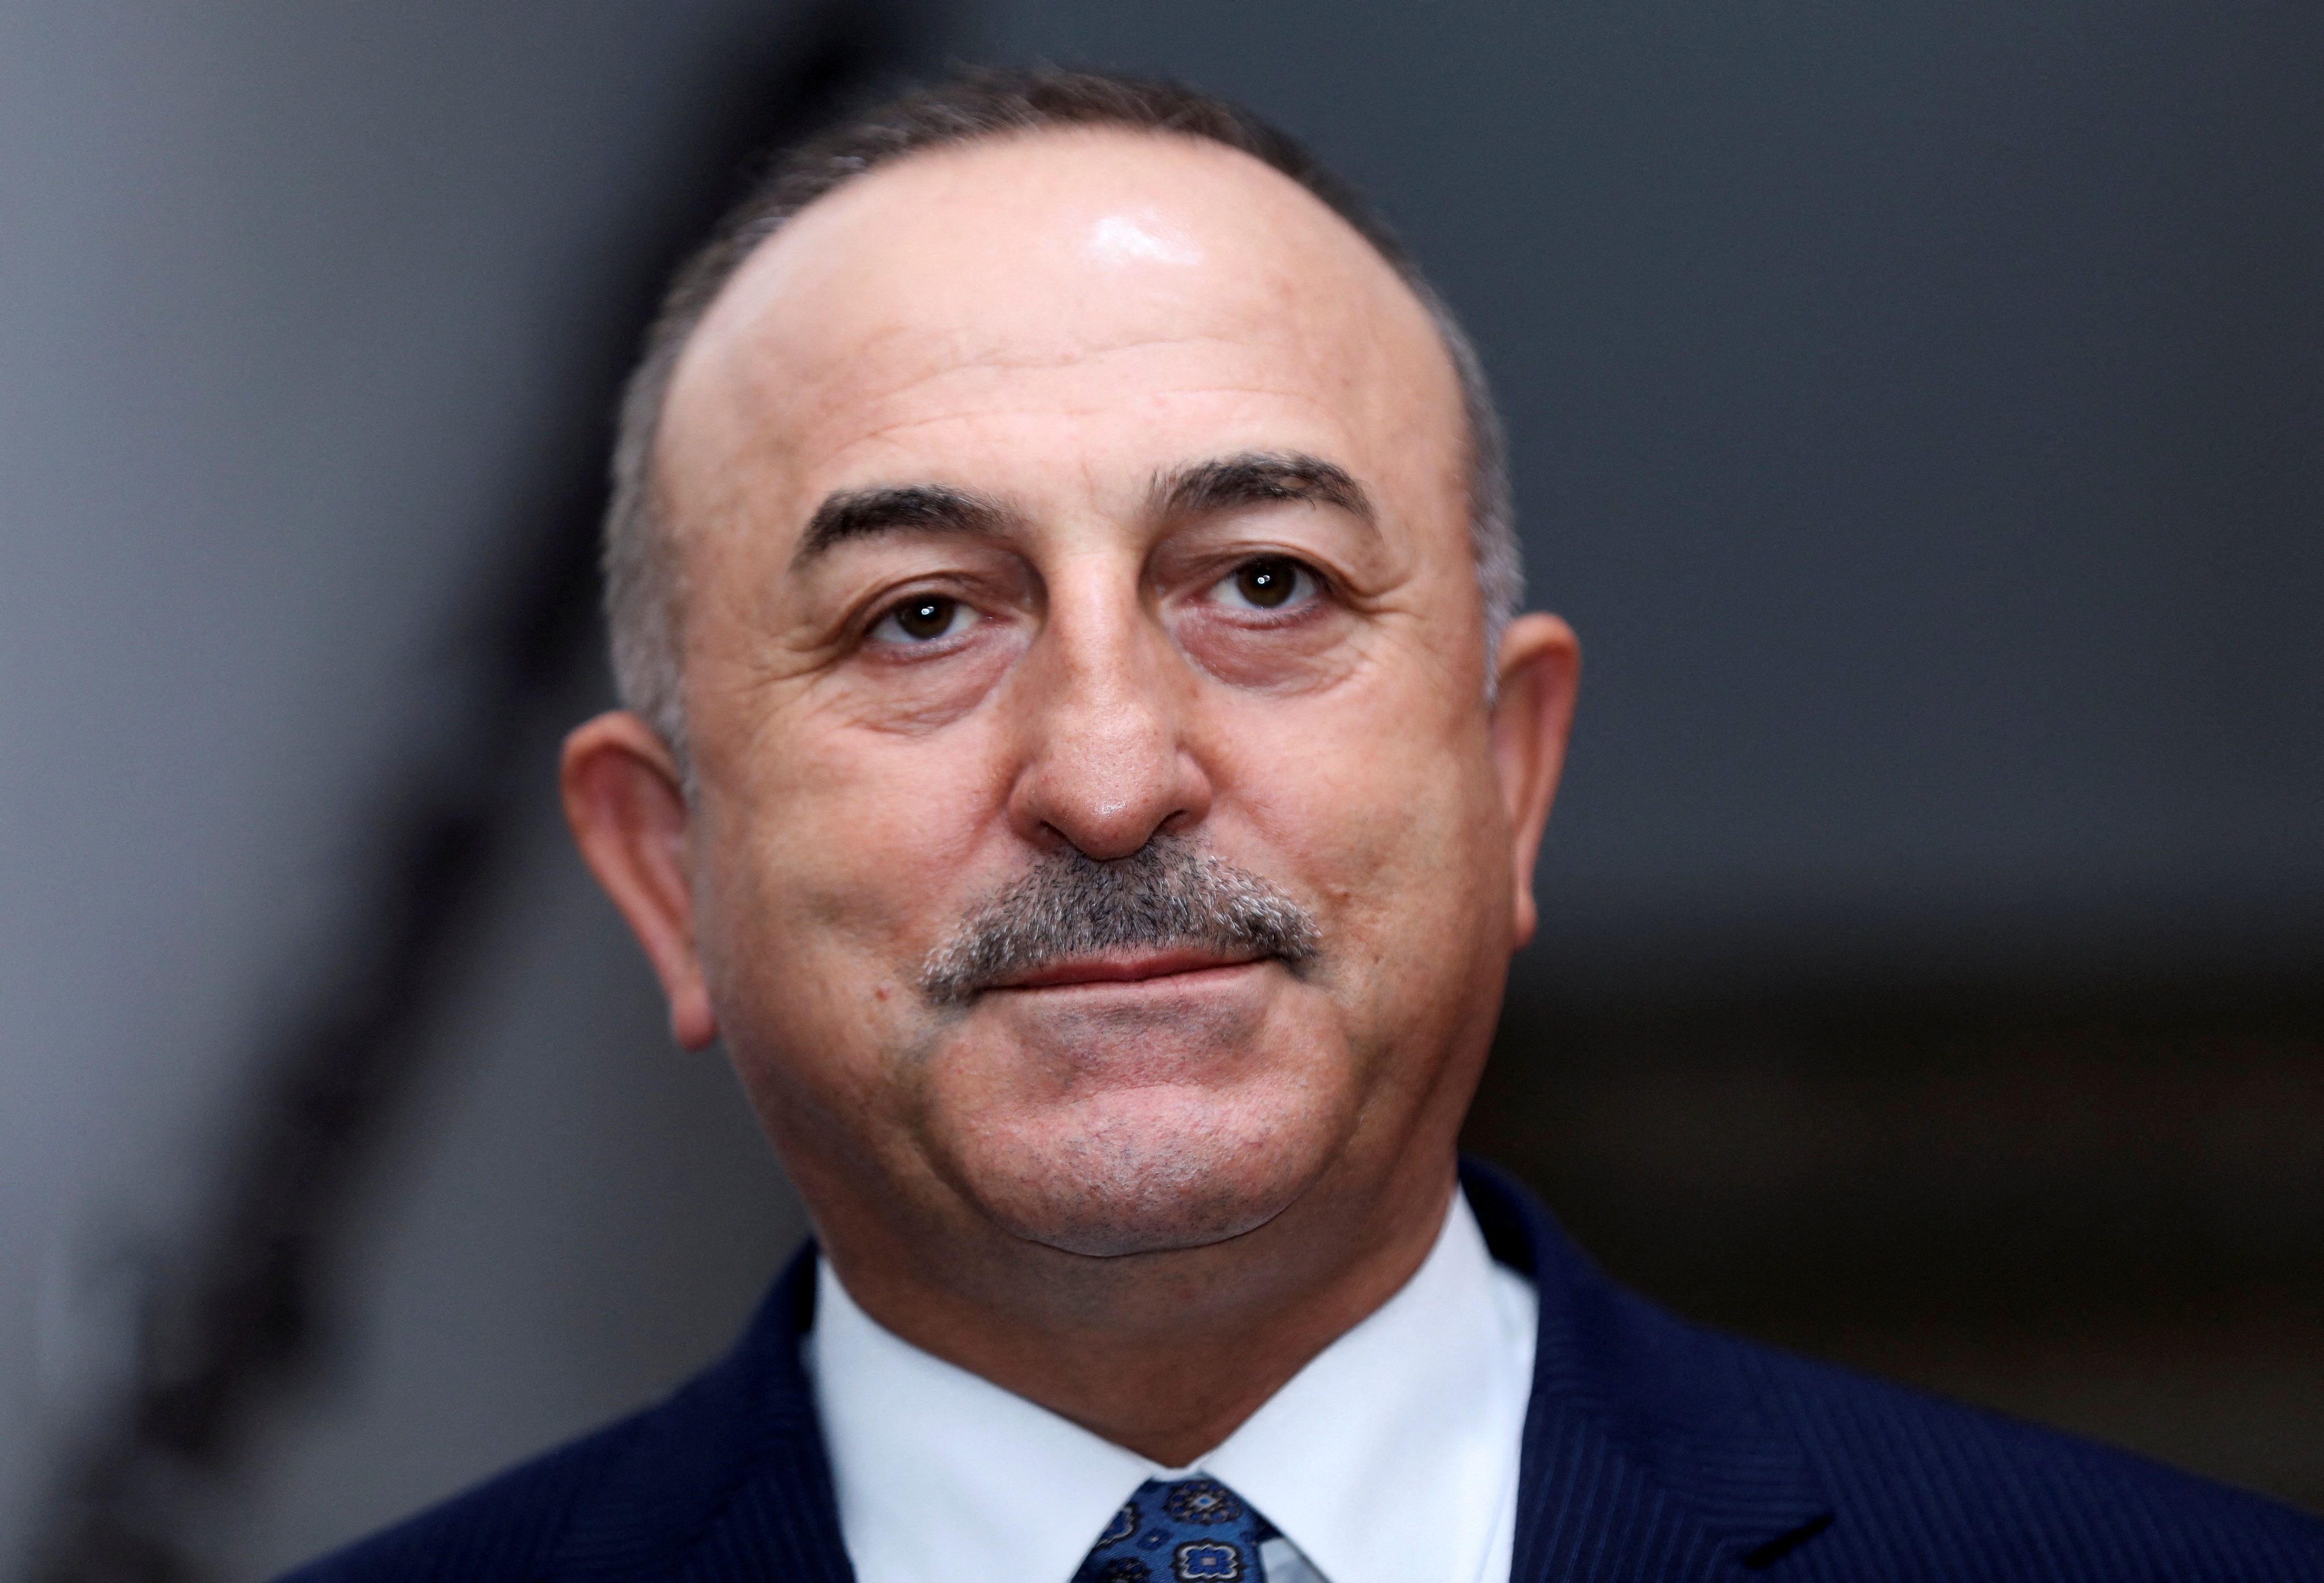 Turkish Foreign Minister Mevlut Cavusoglu attends a news conference in Beirut